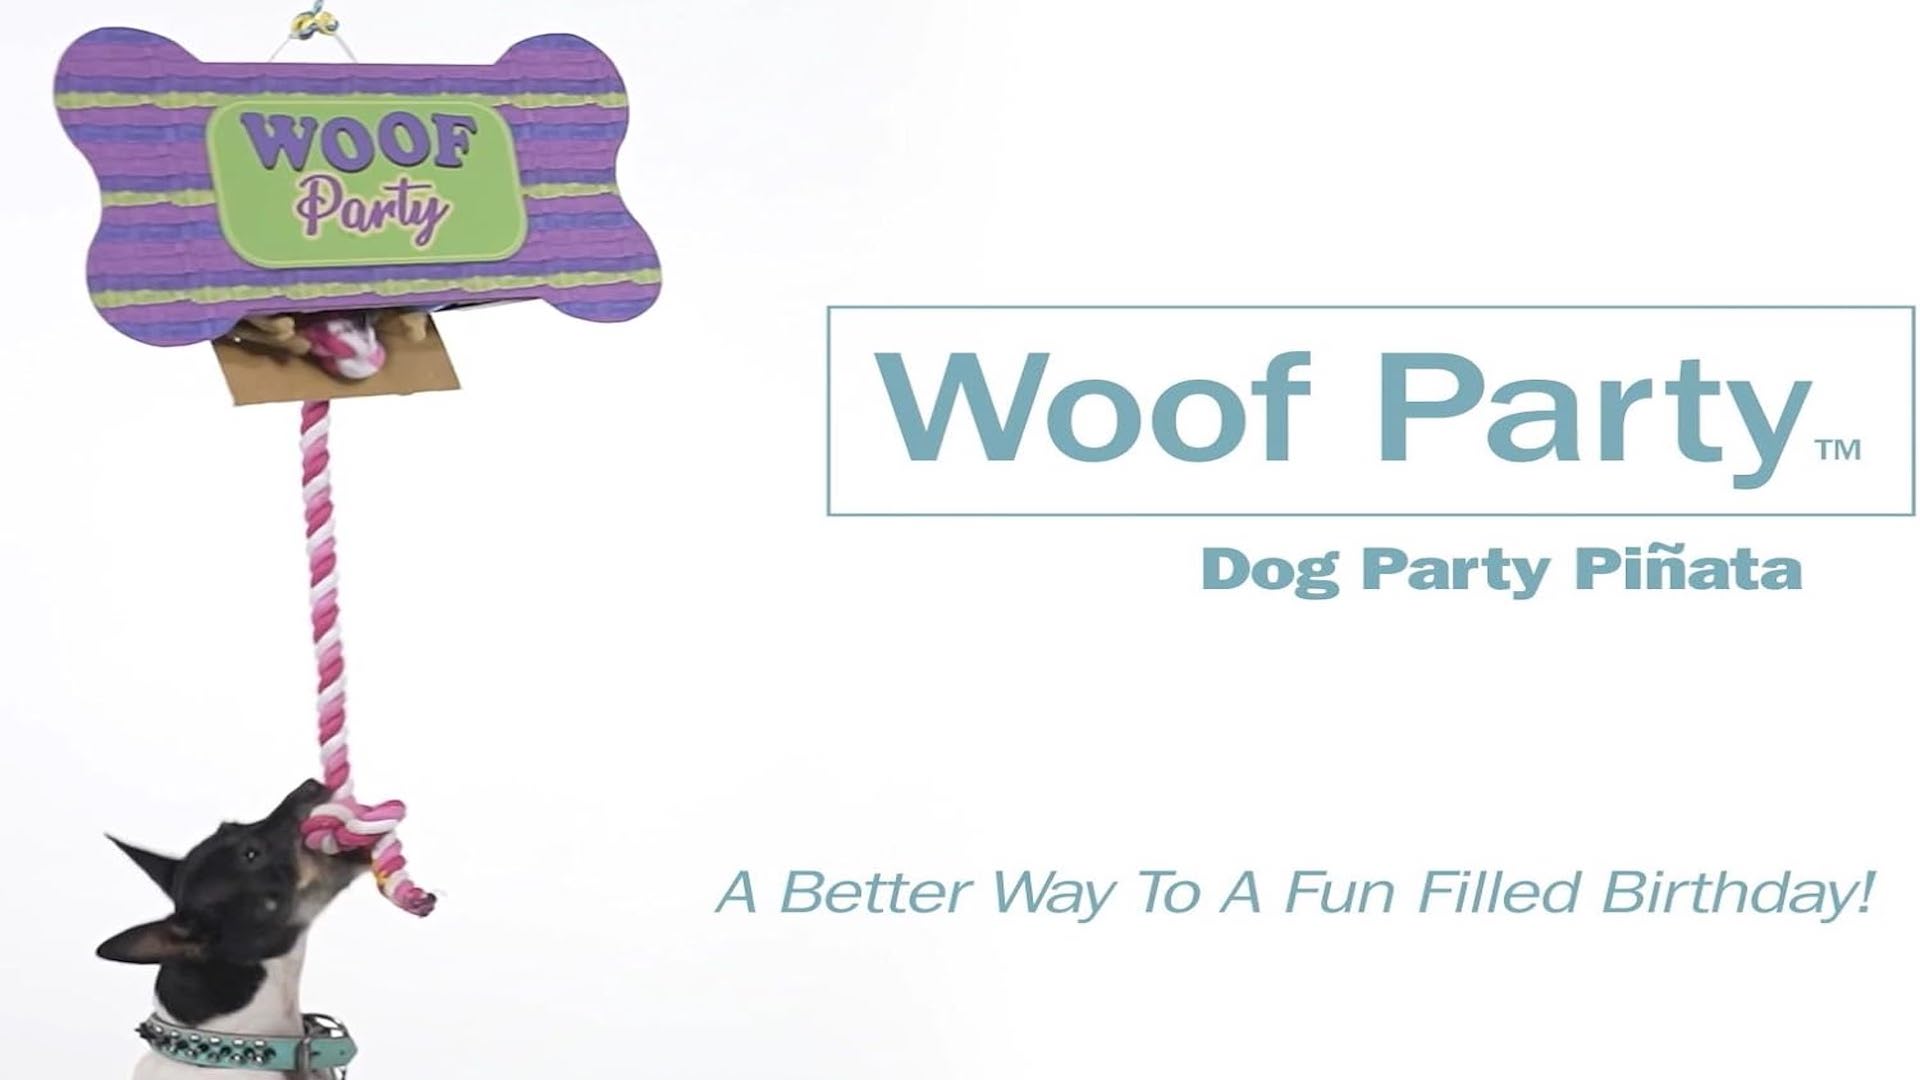 Woof party dog piñata